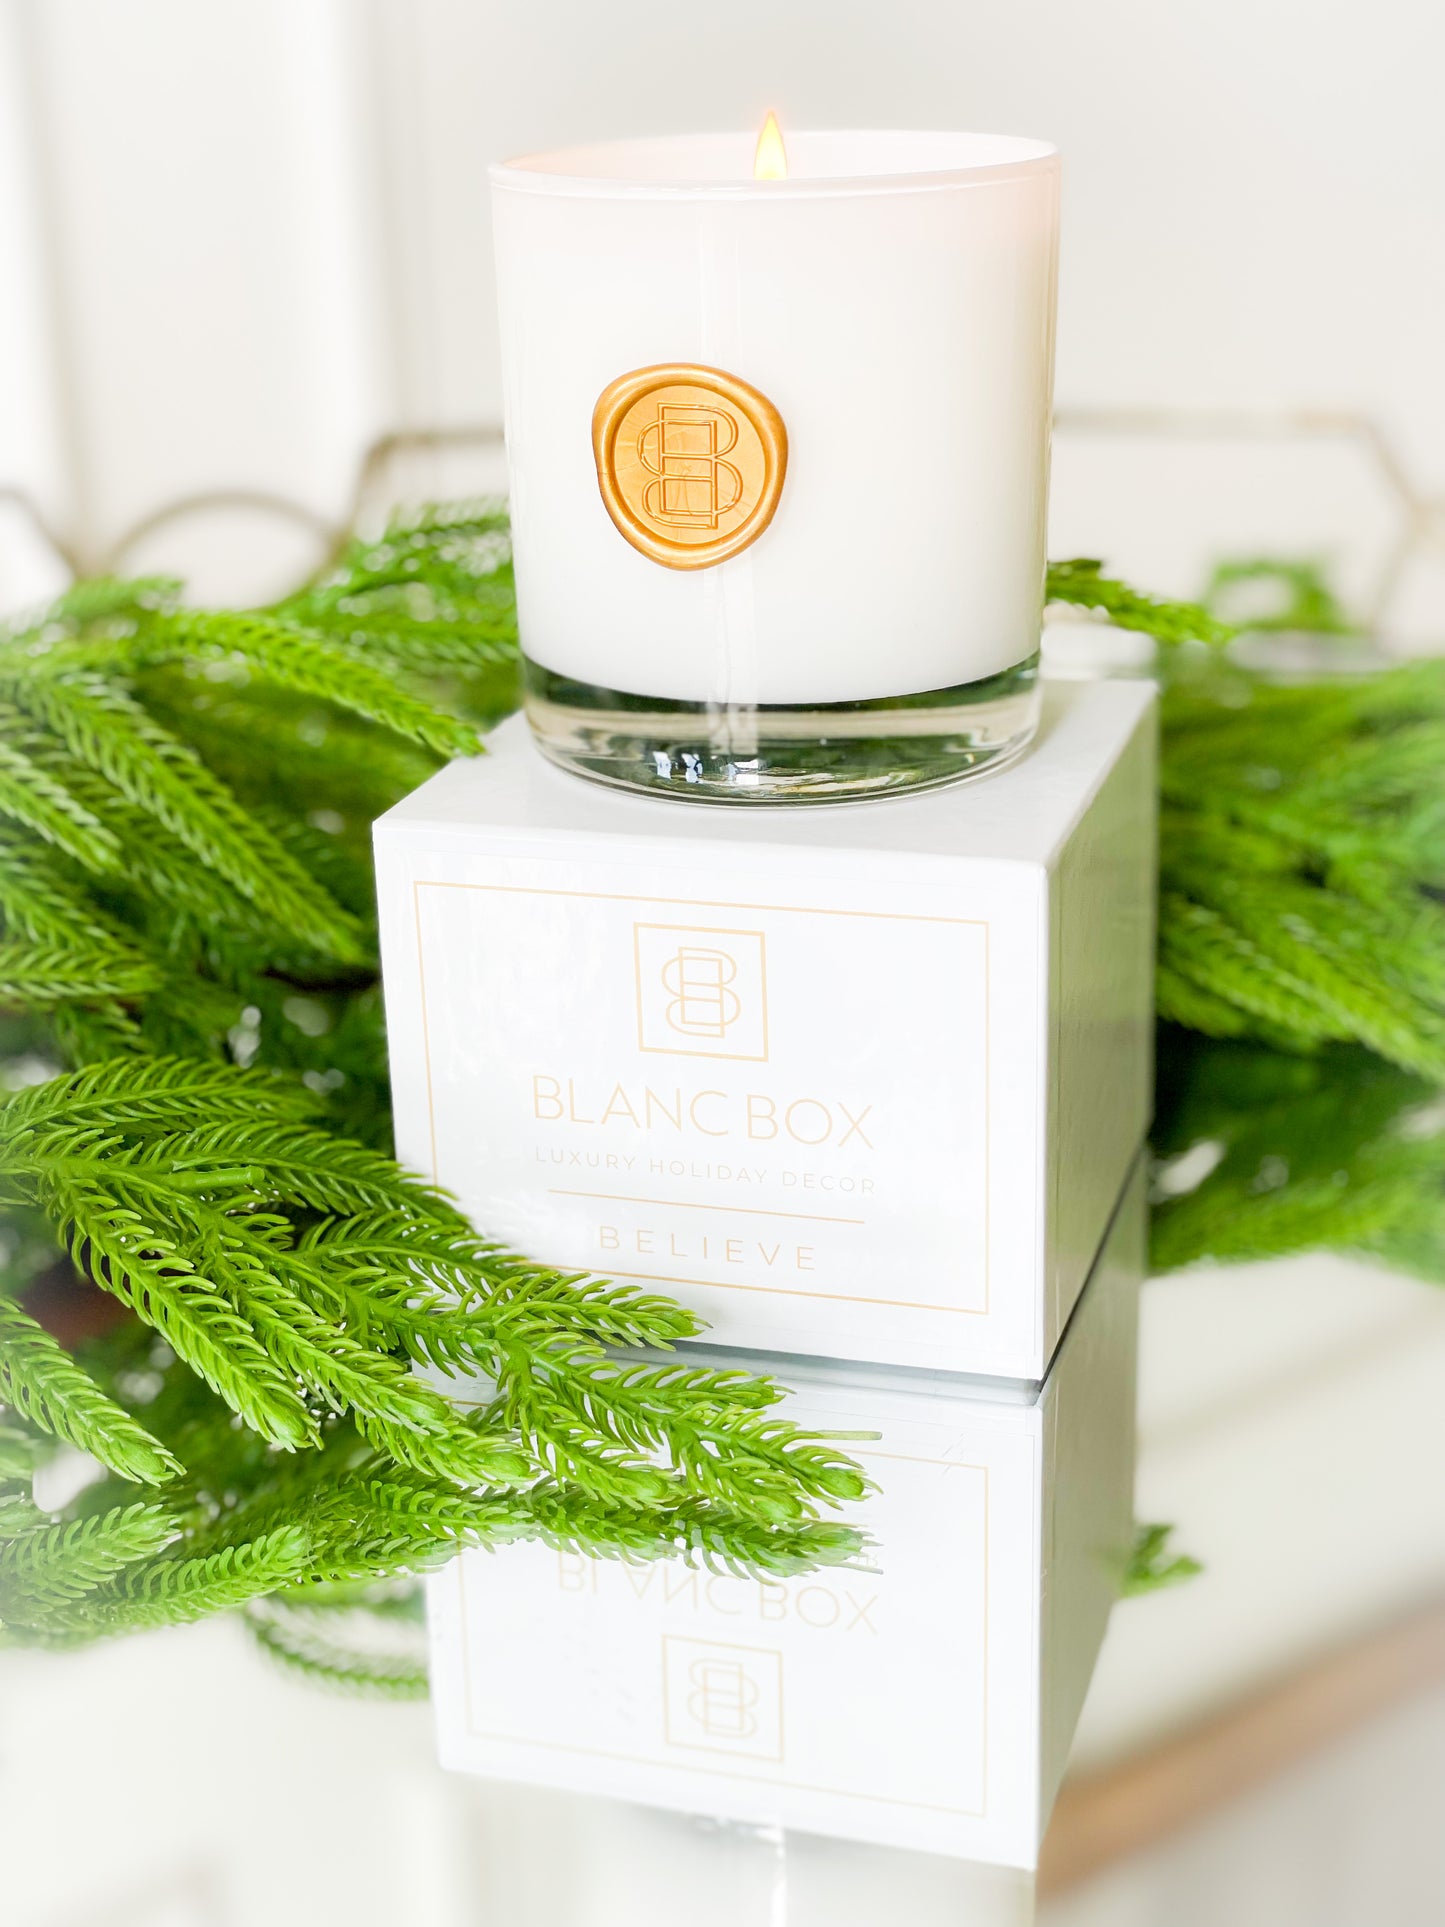 Believe Holiday Blanc Box Candle